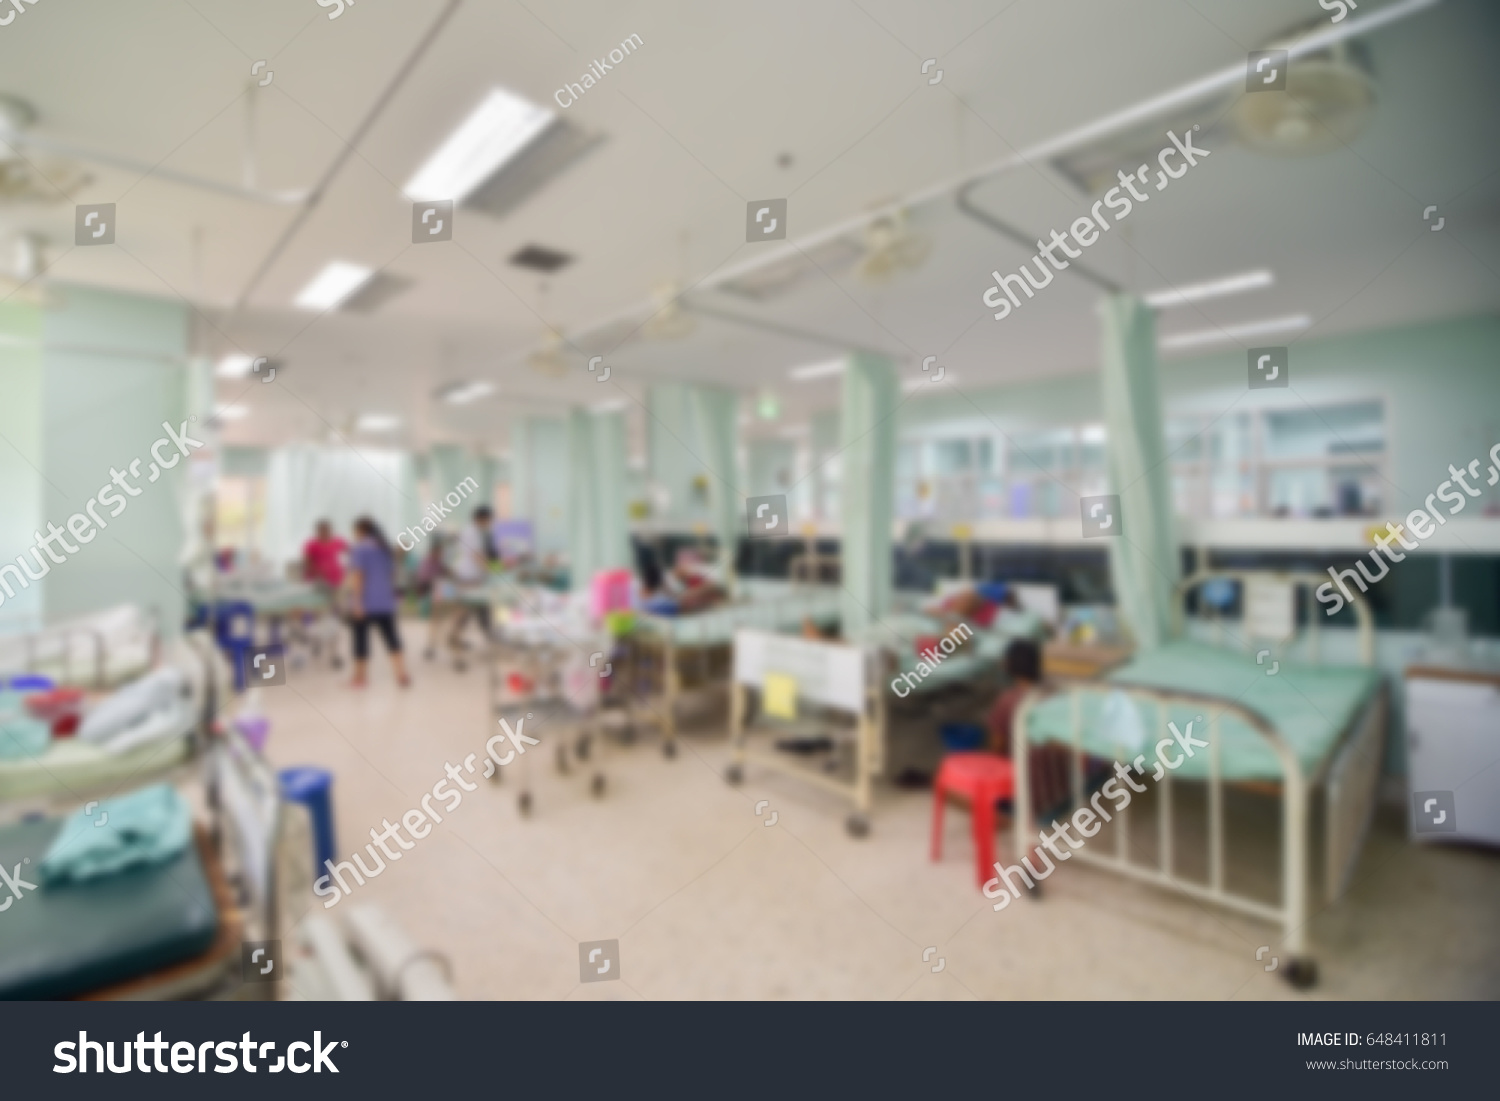 Blurred of nursing care and treatment for patient in the hospital  #648411811